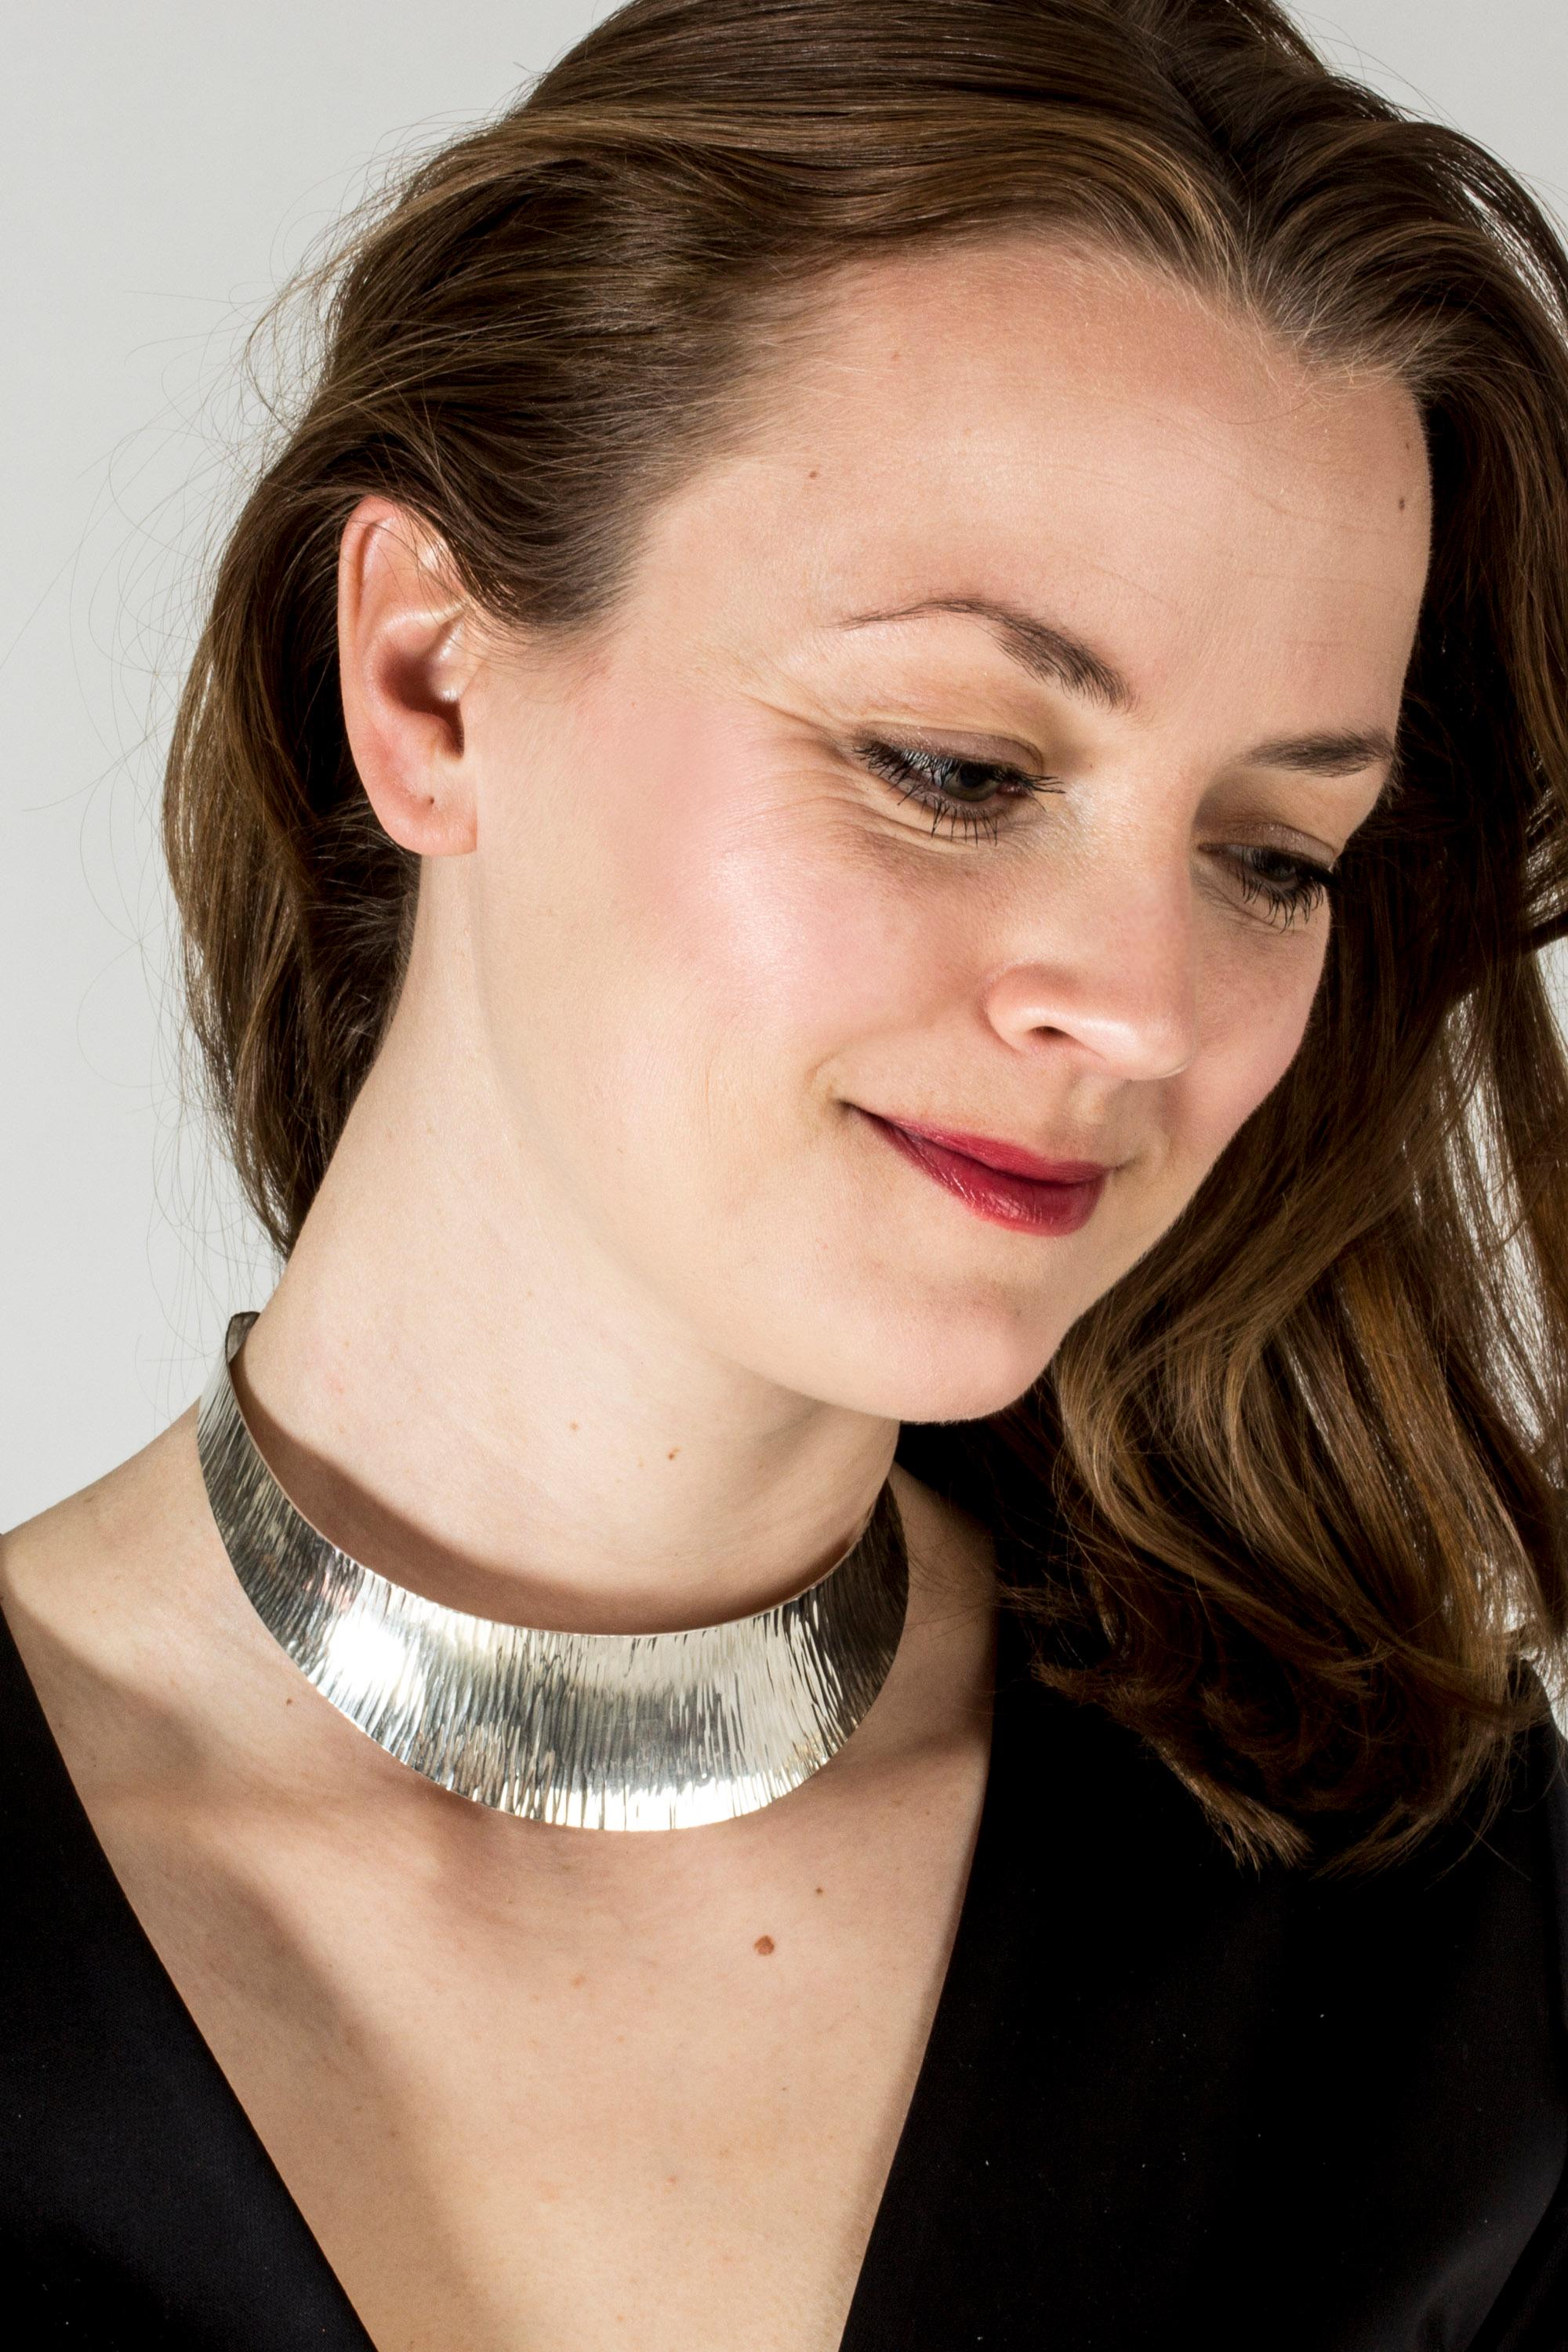 Striking, wide silver neckring by Waldemar Jonsson. The striped pattern catches the light from different angles and makes the piece stand out in its simplicity.